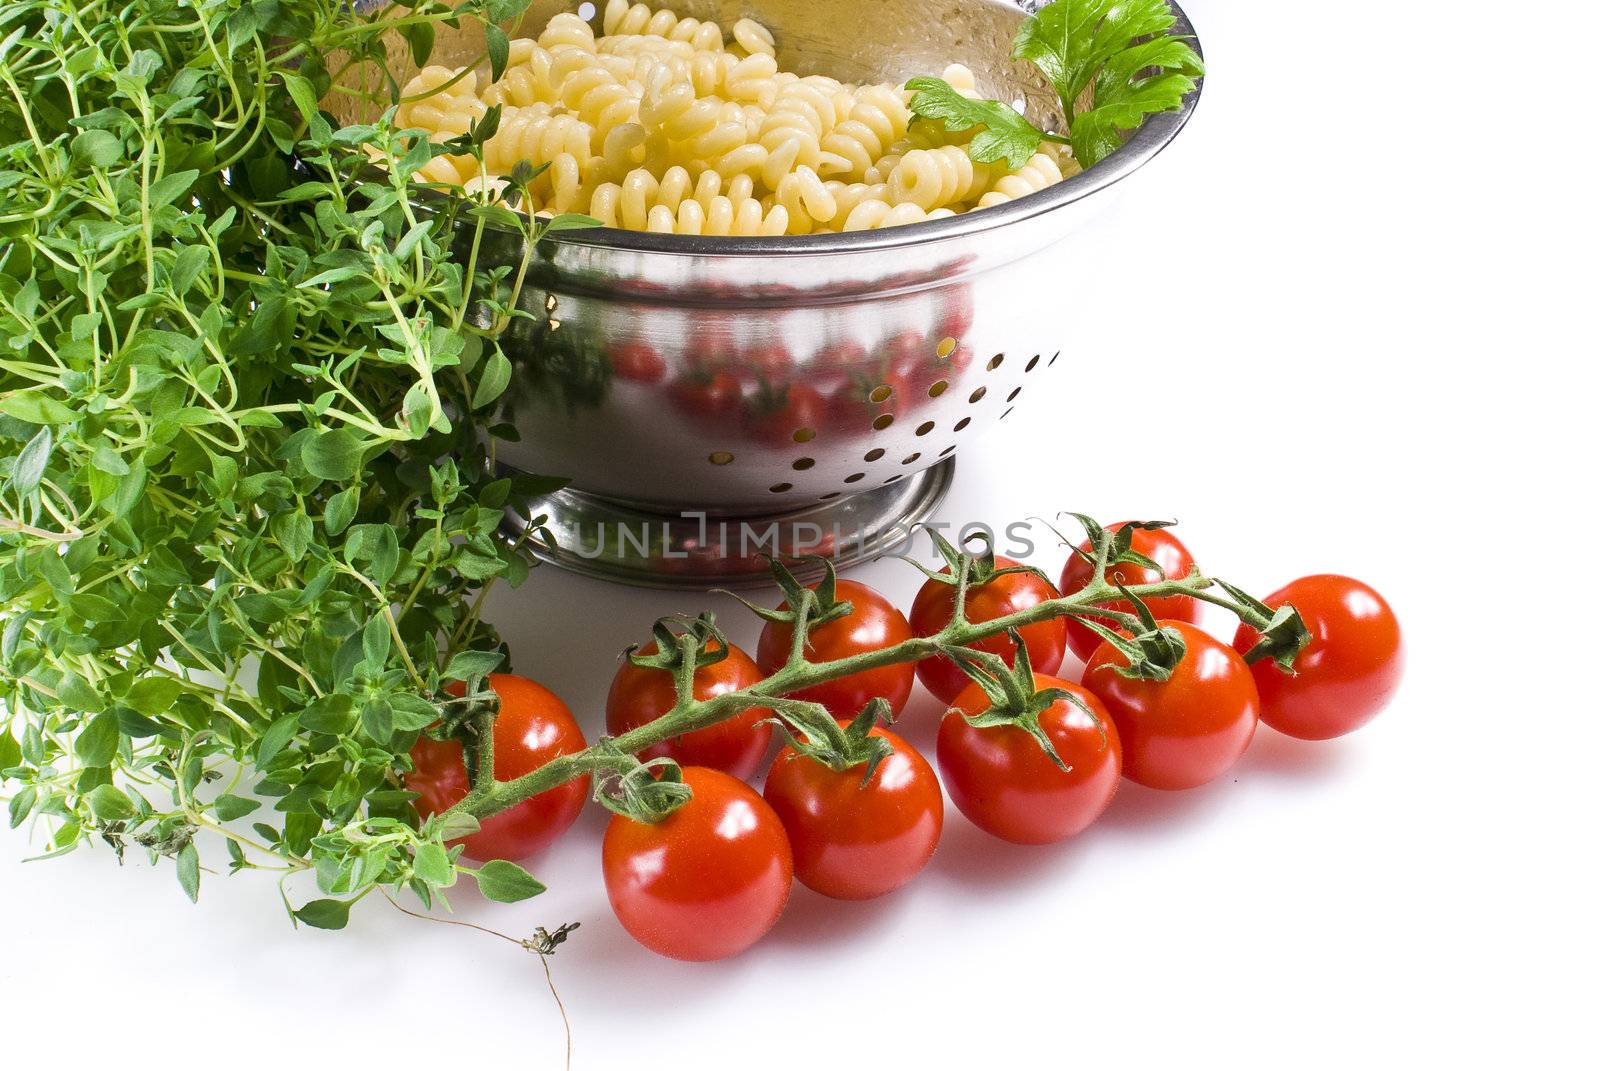 Fusilli pasta with thyme and tomatoes by caldix